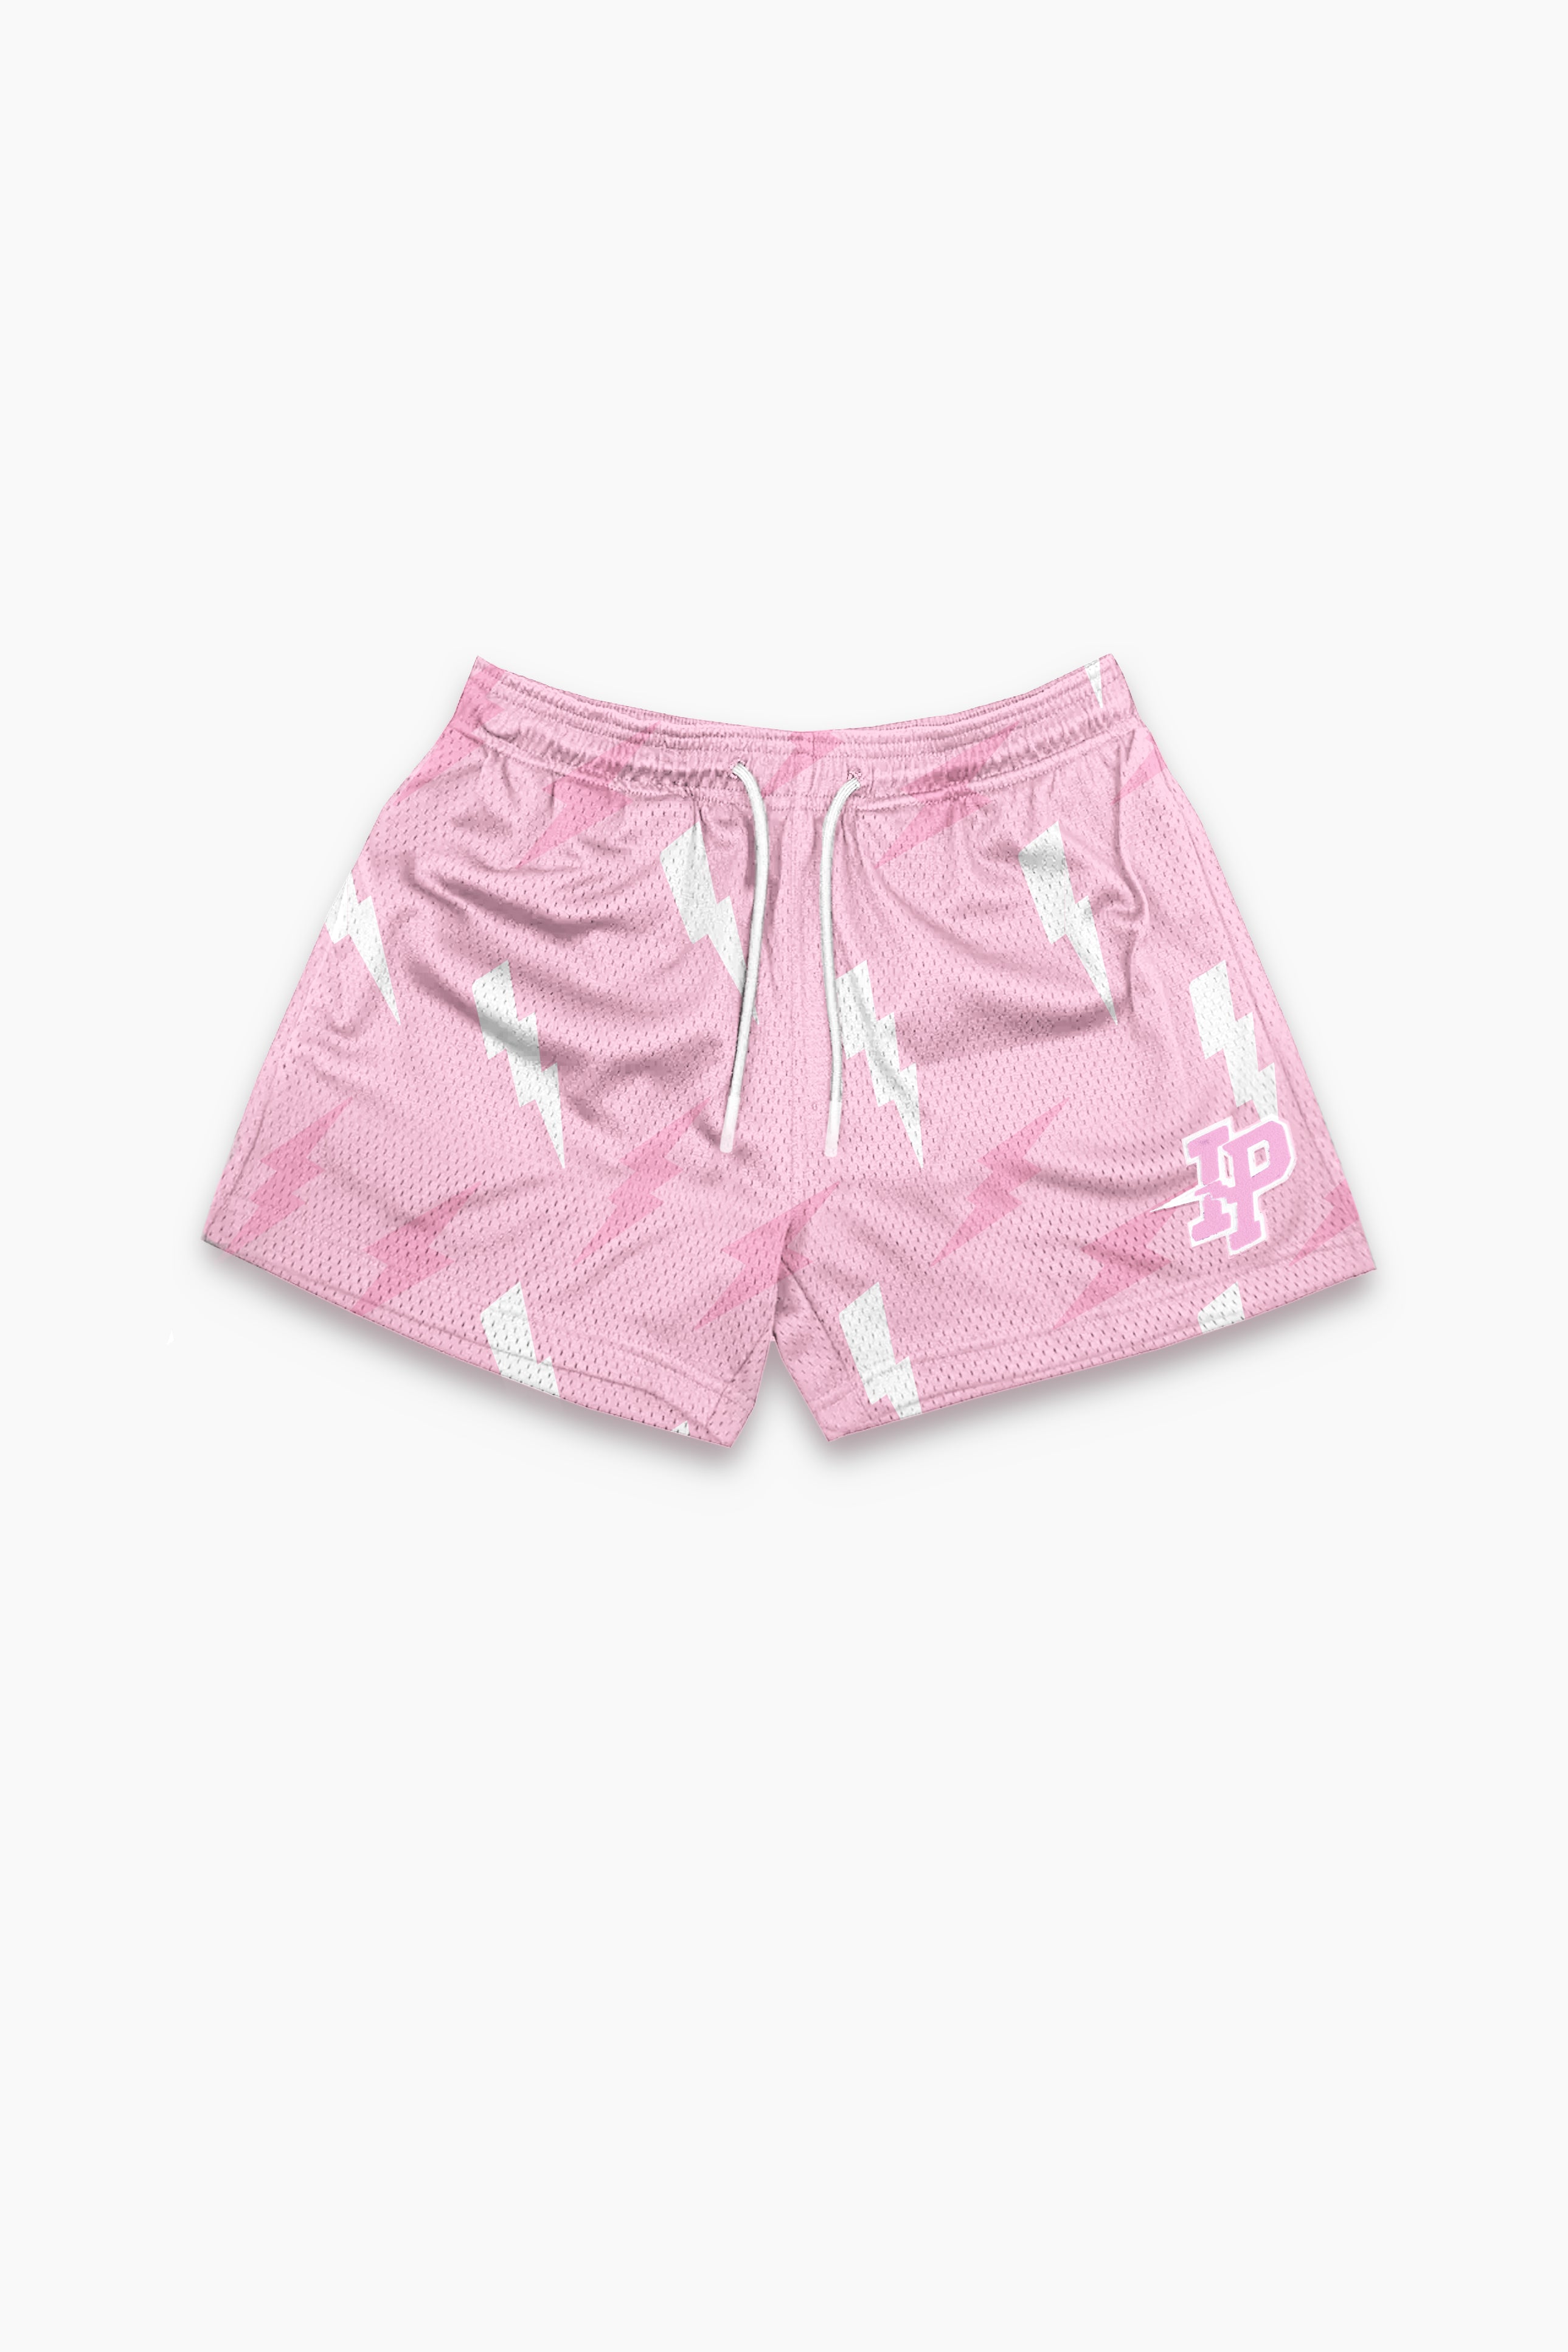 Women’s Graphic Mesh Shorts - Scatter Bolt Pink